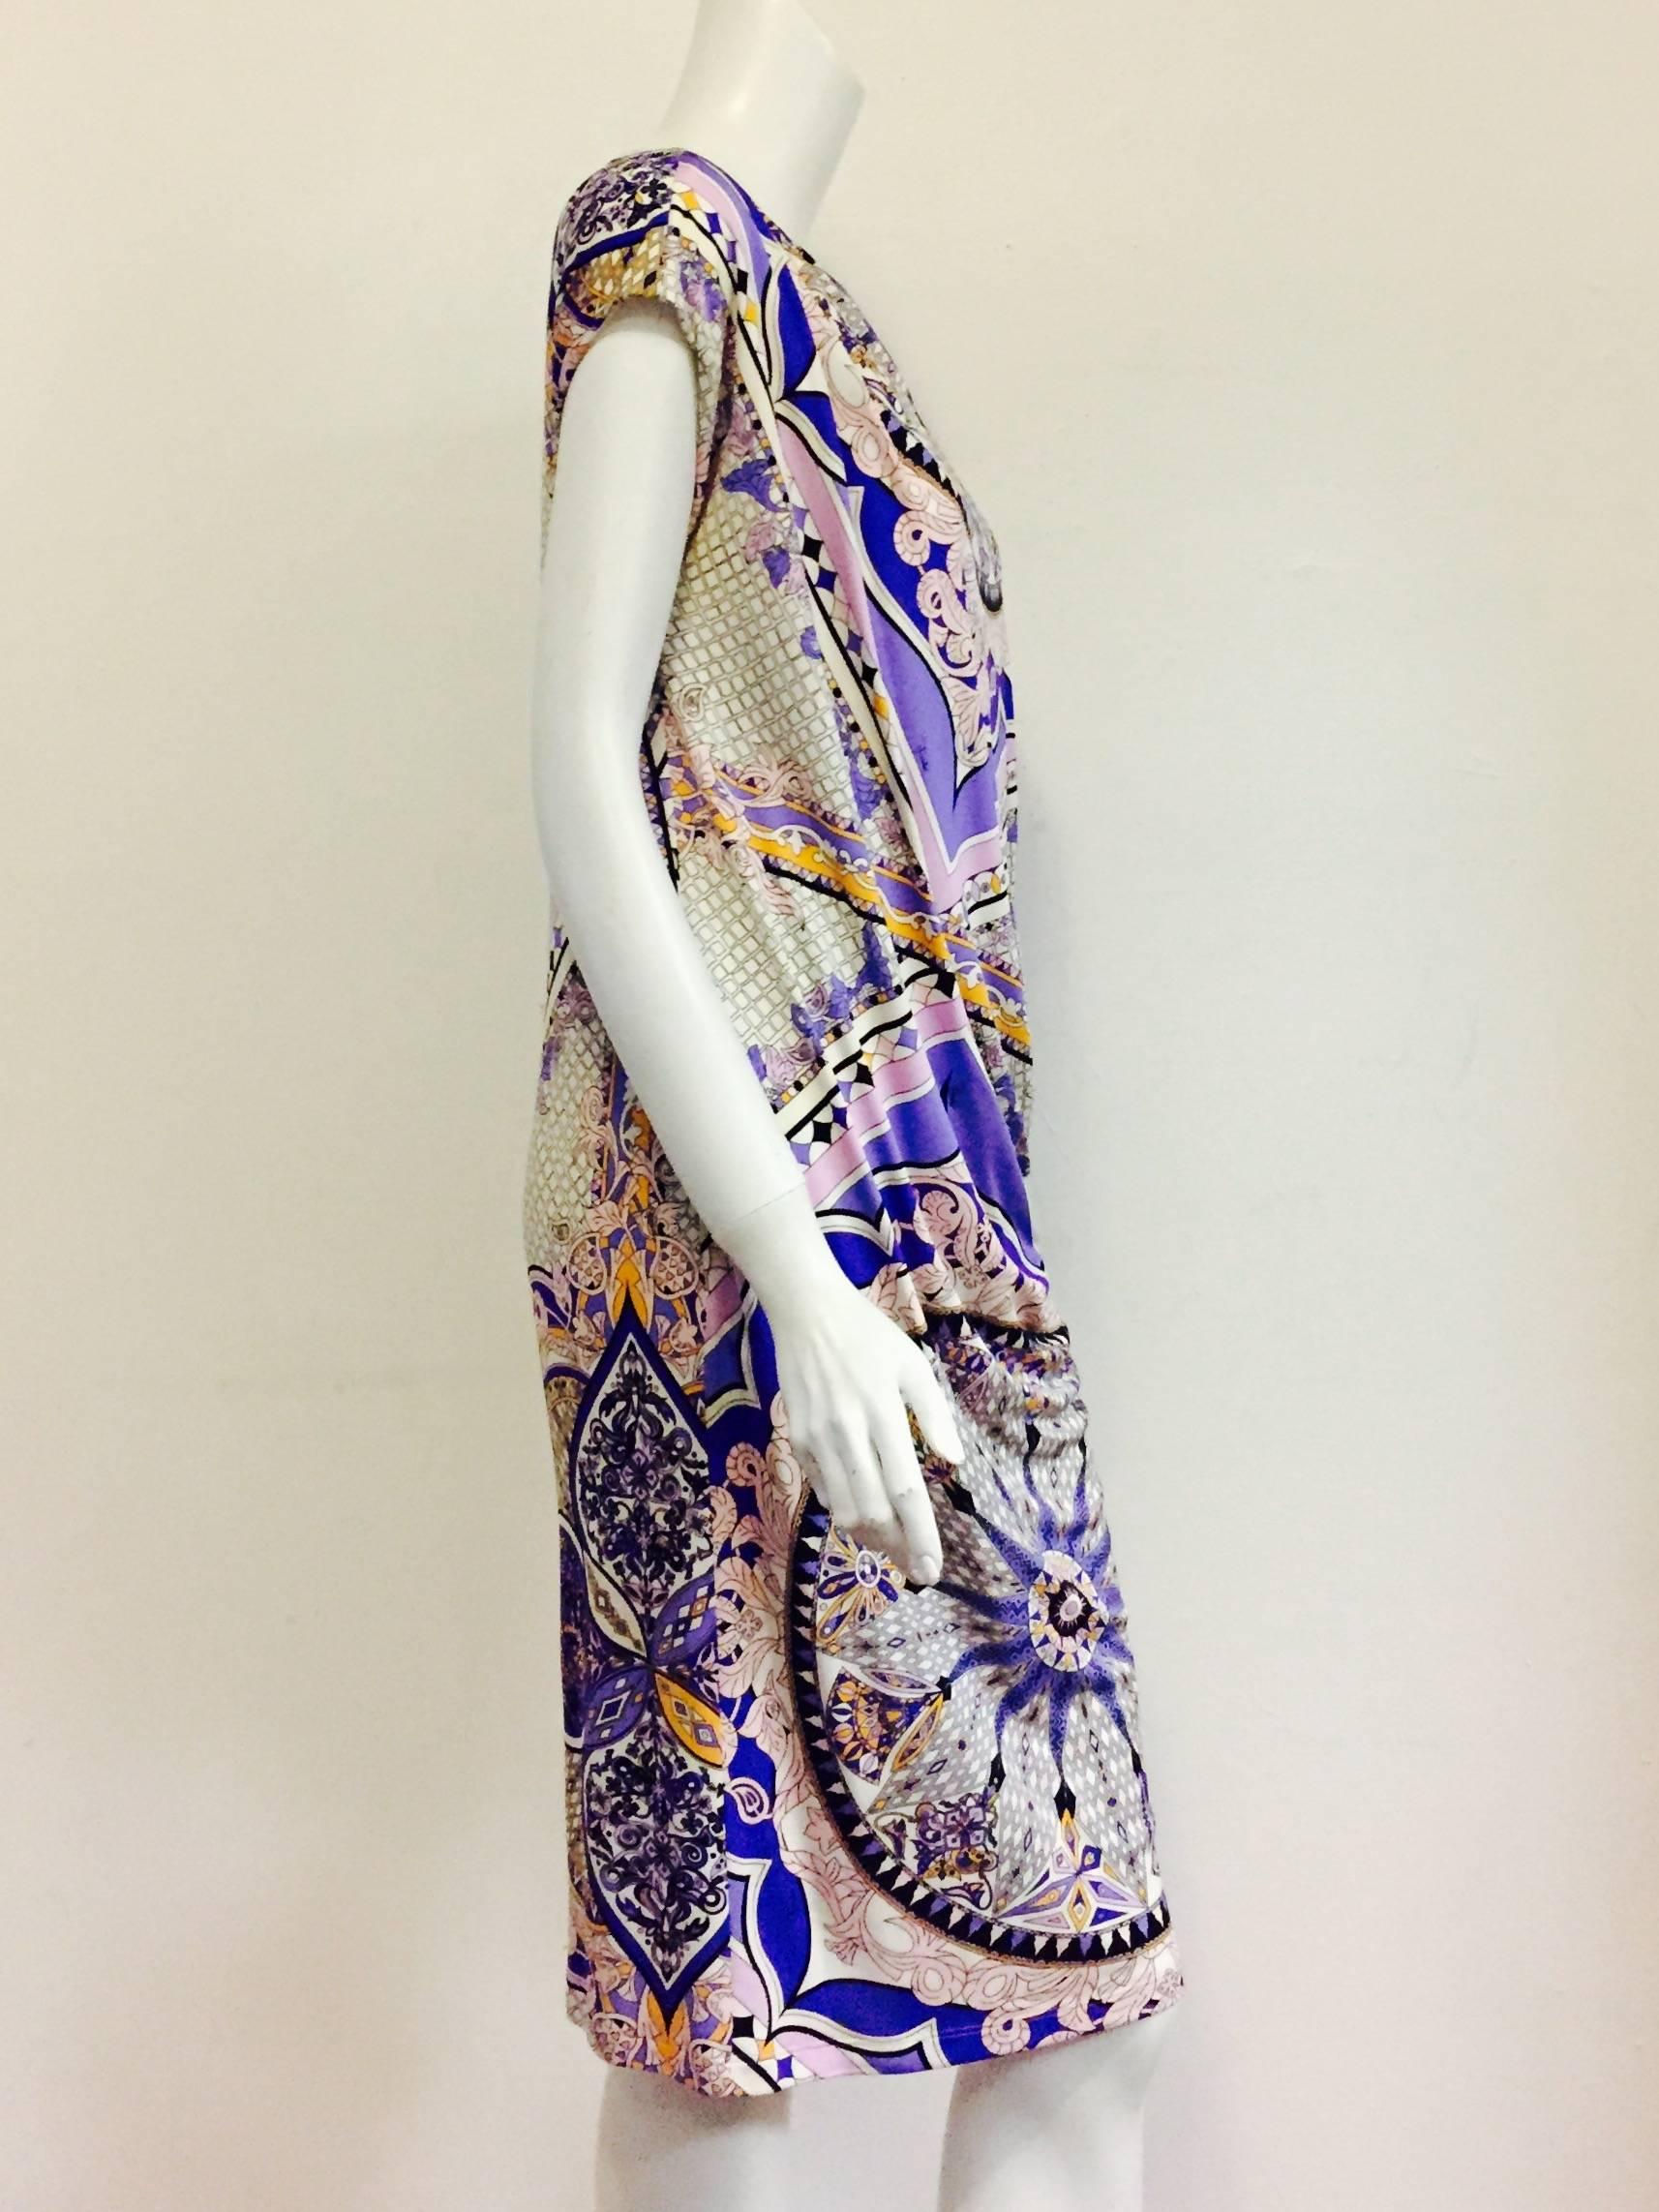 Print Sheath Dress with scoop neck is quintessentially Emilio Pucci!  Features signature abstract circle design in lavender, purple, pink, black and white with orange highlights for a flattering design. Reminiscent of the 1920s, dress is draped and